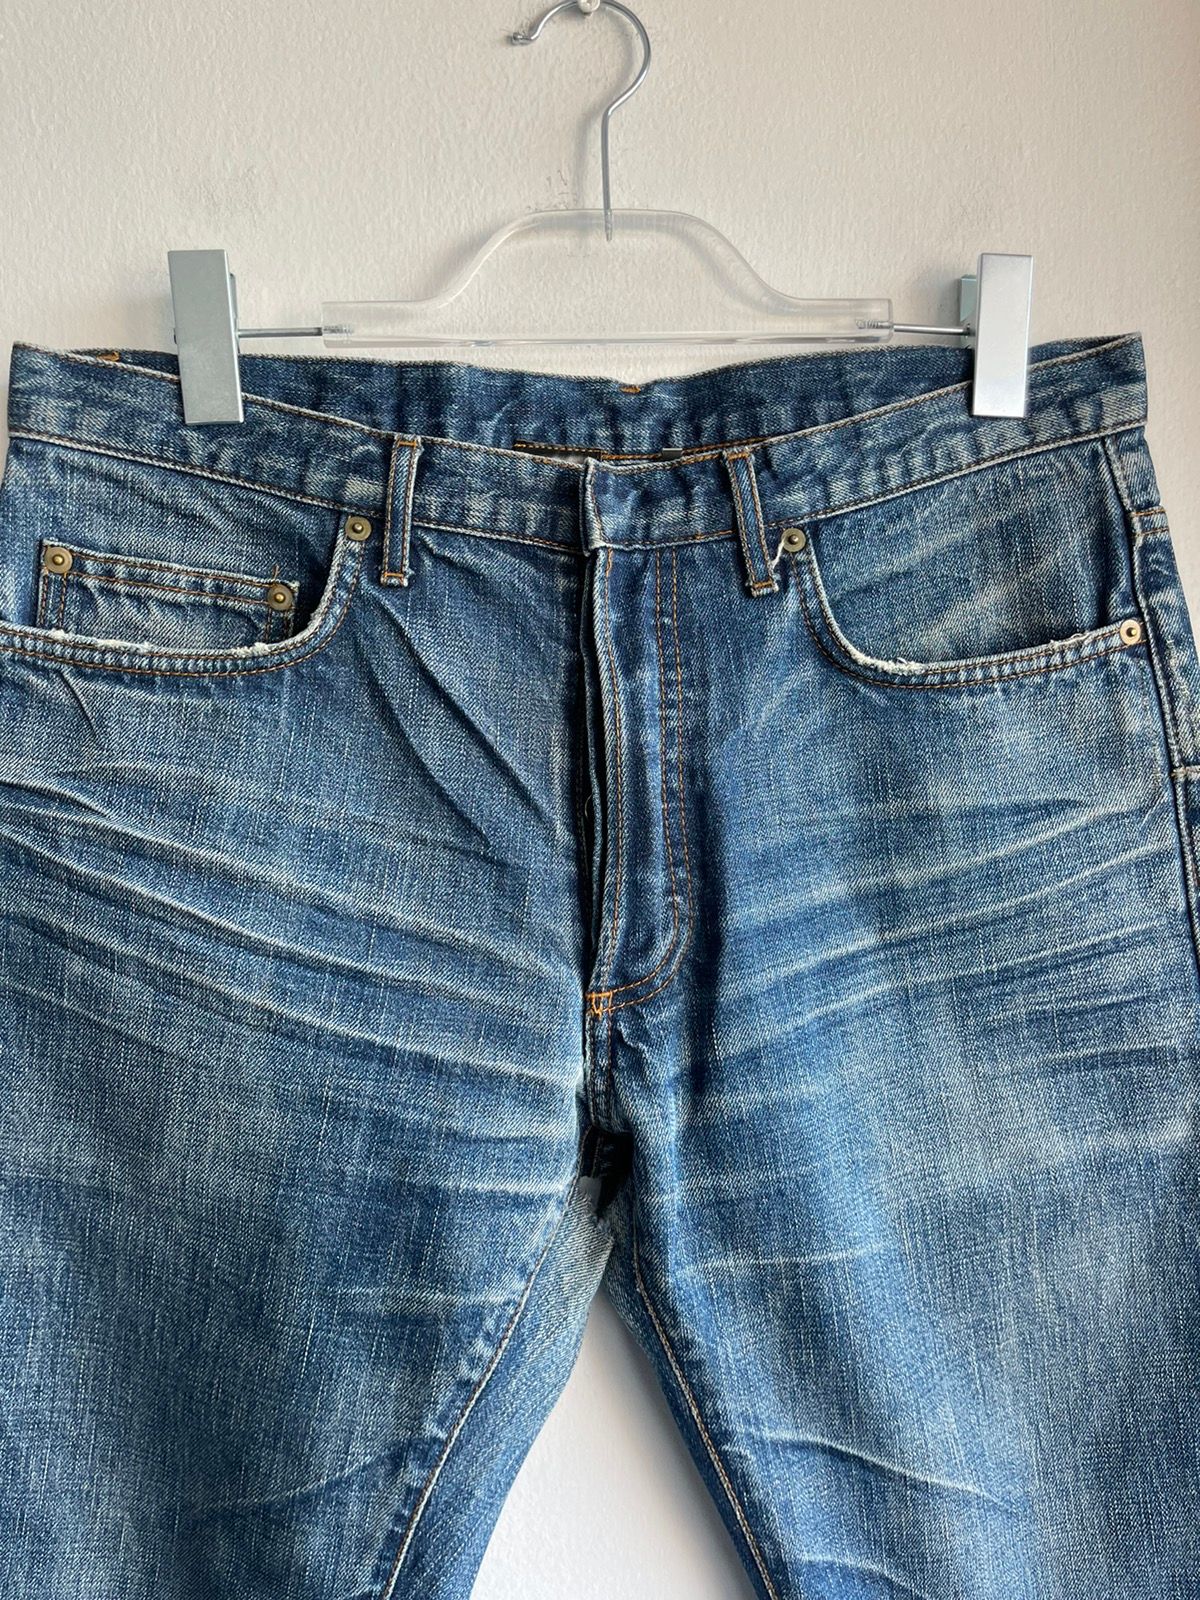 Dior Homme 04 Hedi Claw Mark USED Jeans MIJ SZ 32